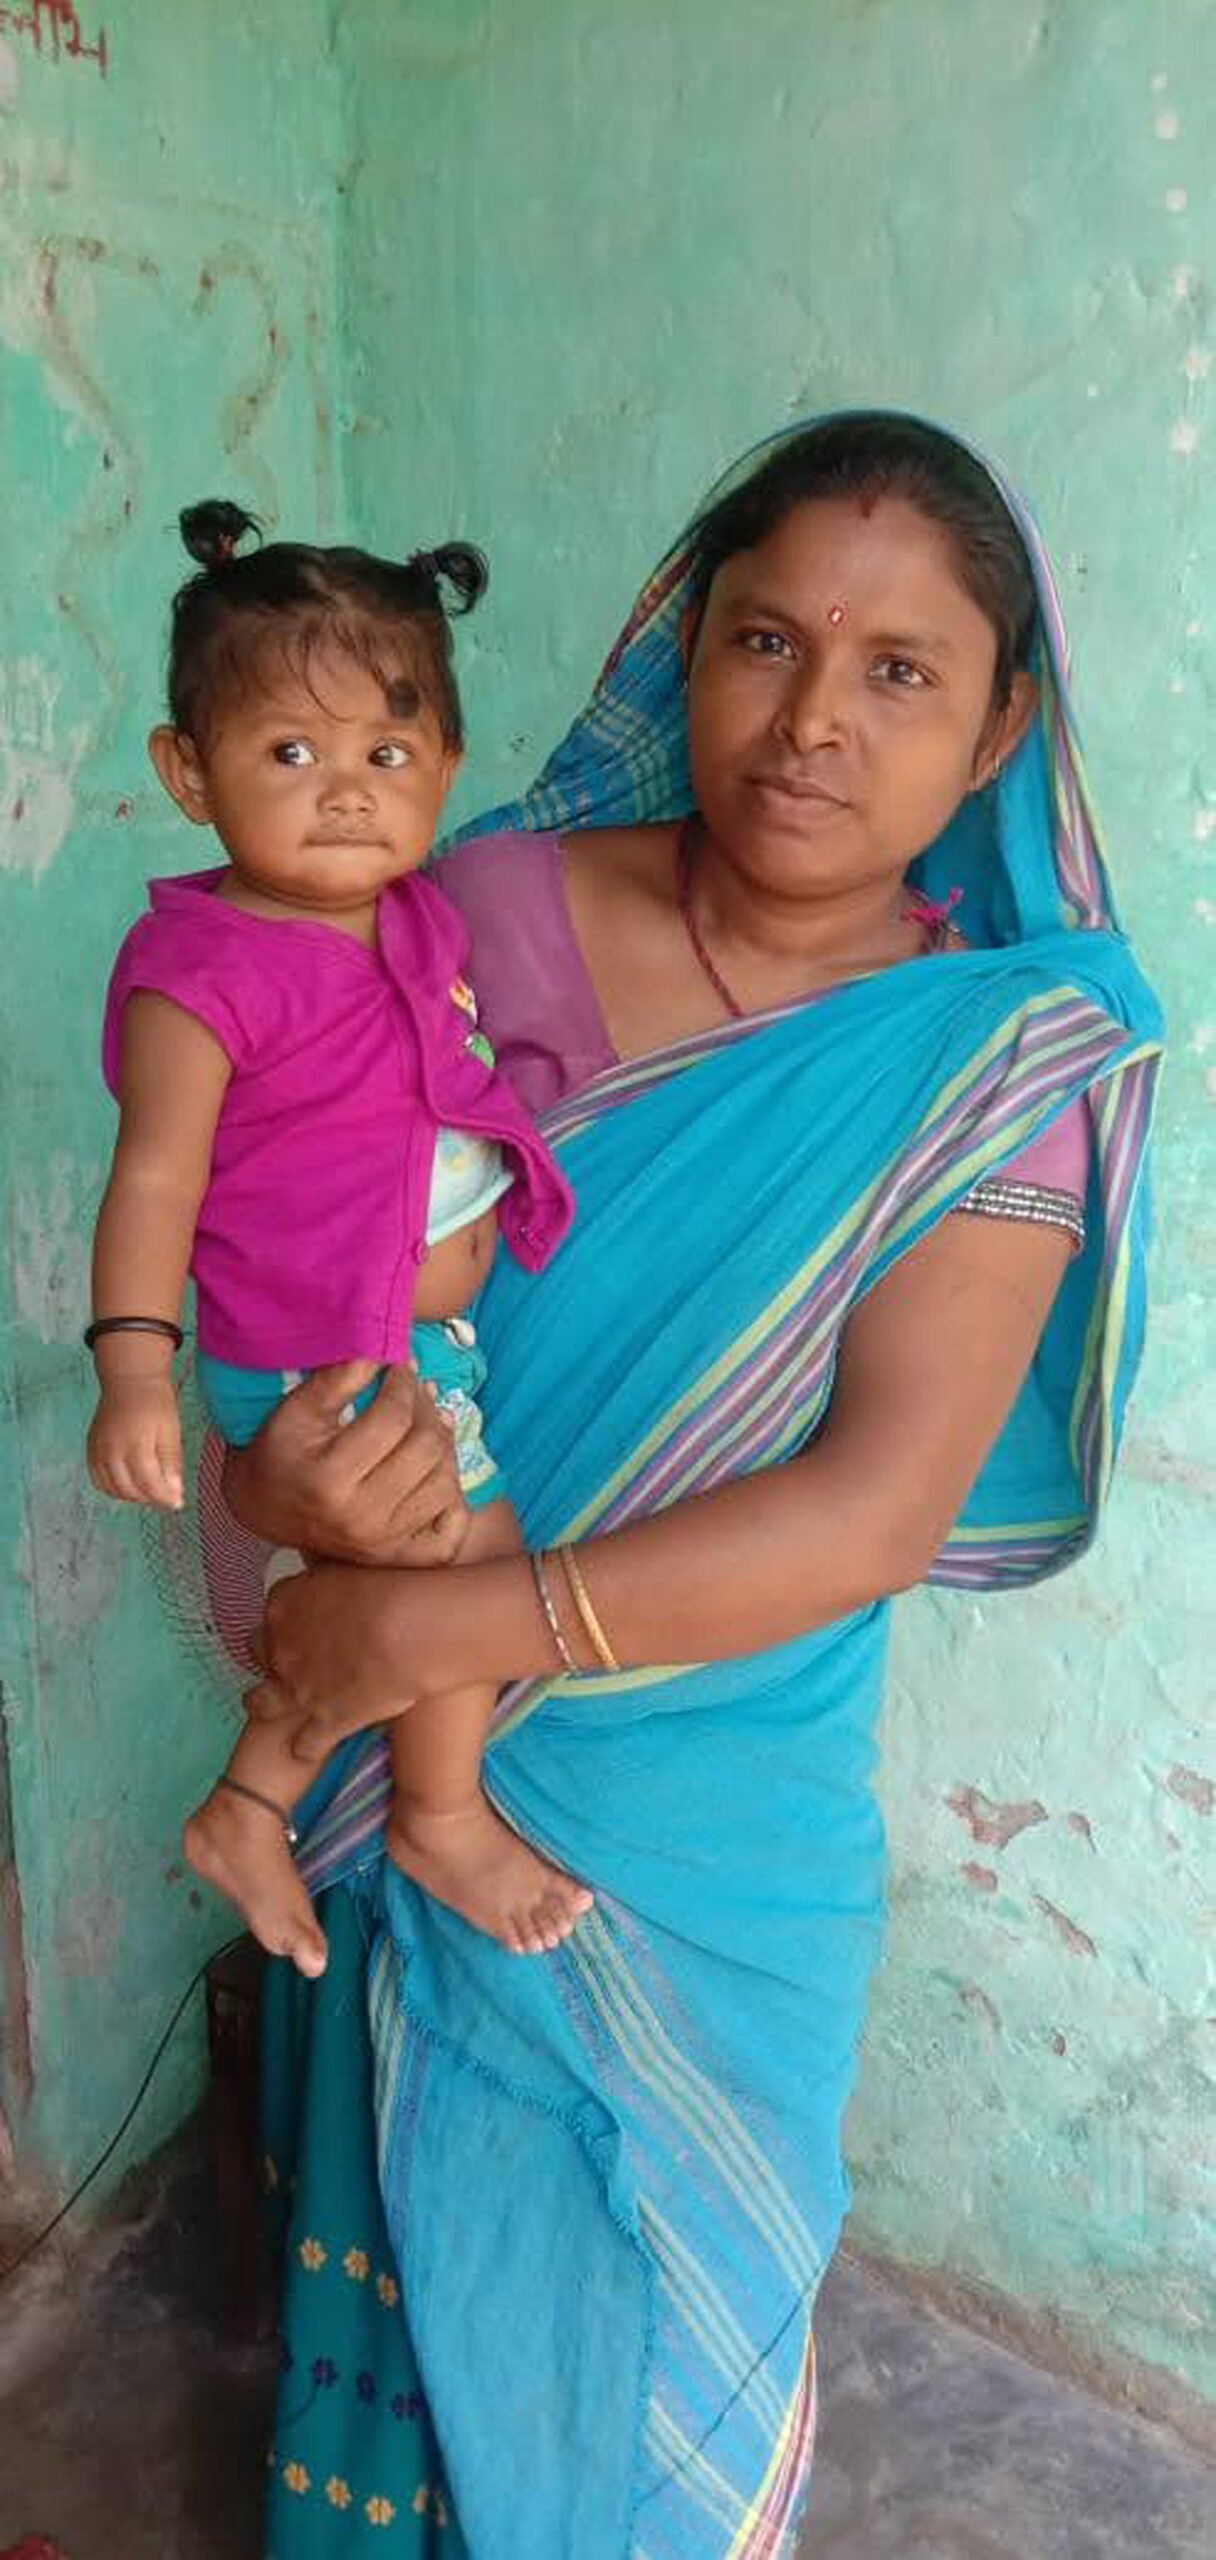 Purnima Tanti with her daughter, who was delivered safely at a government hospital after receiving support through the Improving Lives programme. Image: UNICEF.